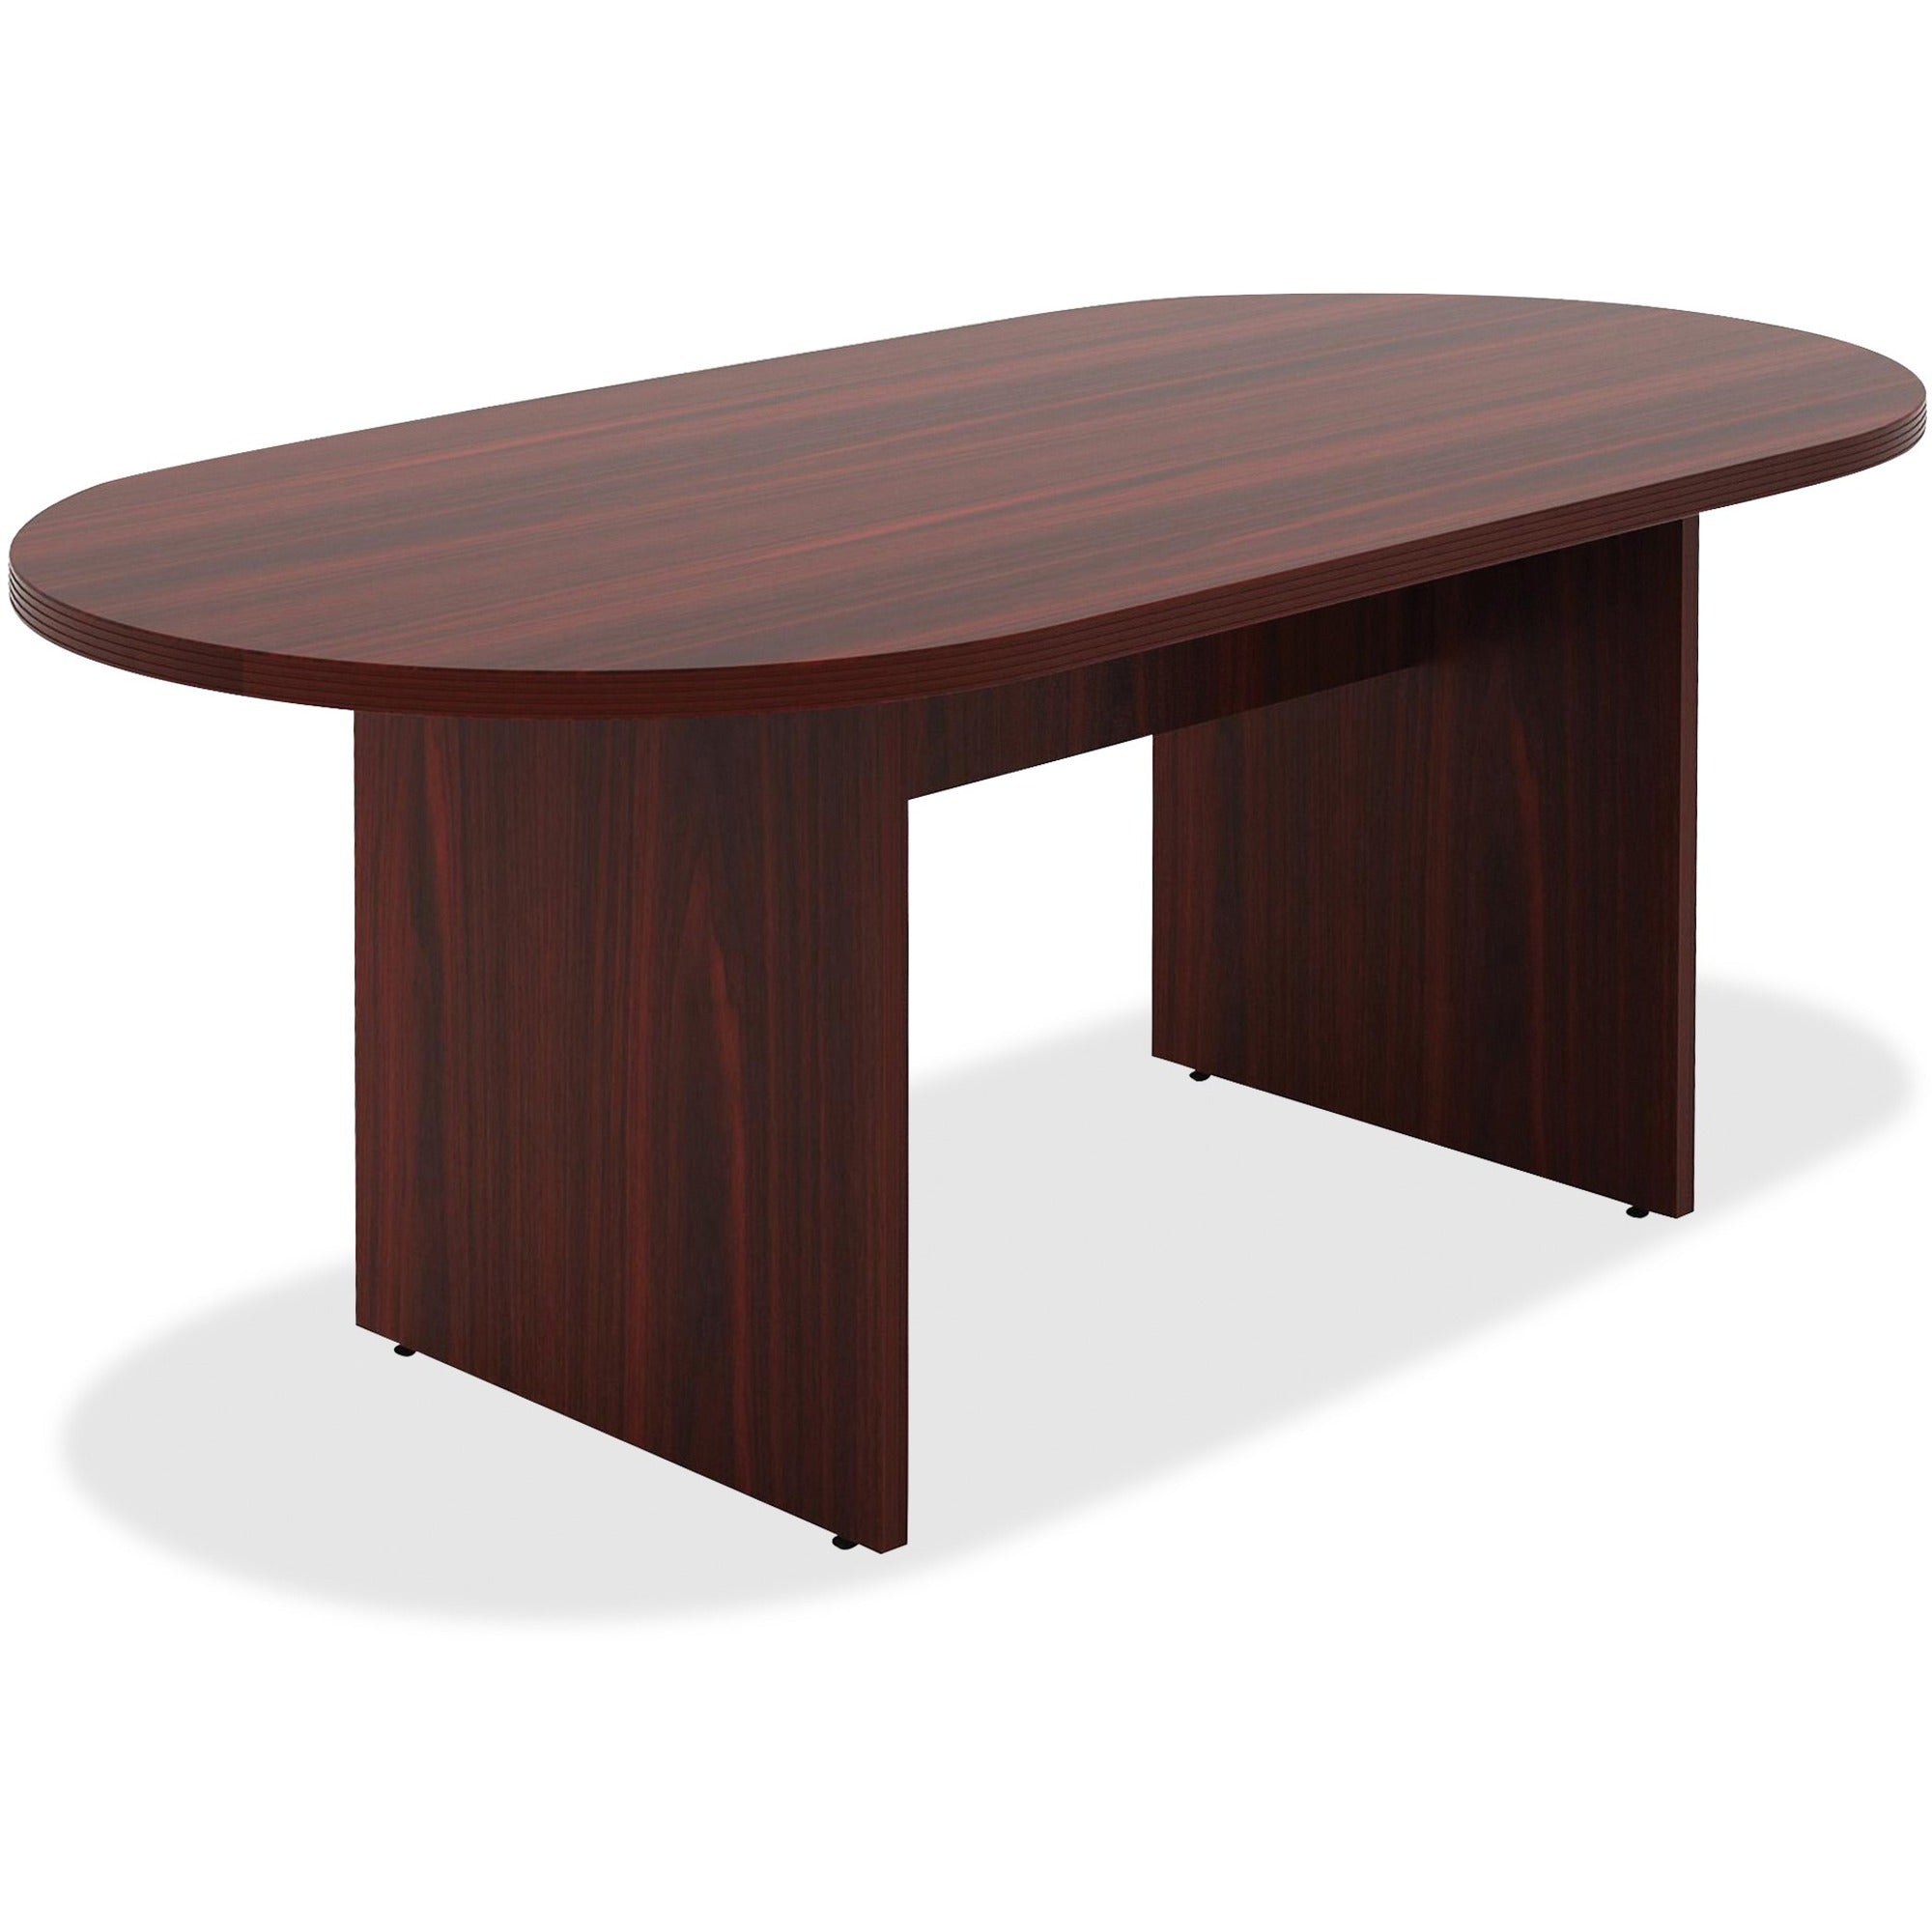 Lorell Chateau Series 6' Oval Conference Table - 70.9" x 35.4"30" Table, 1.5" Top - Reeded Edge - Material: P2 Particleboard - Finish: Mahogany Laminate - Durable, Modesty Panel - For Meeting - 